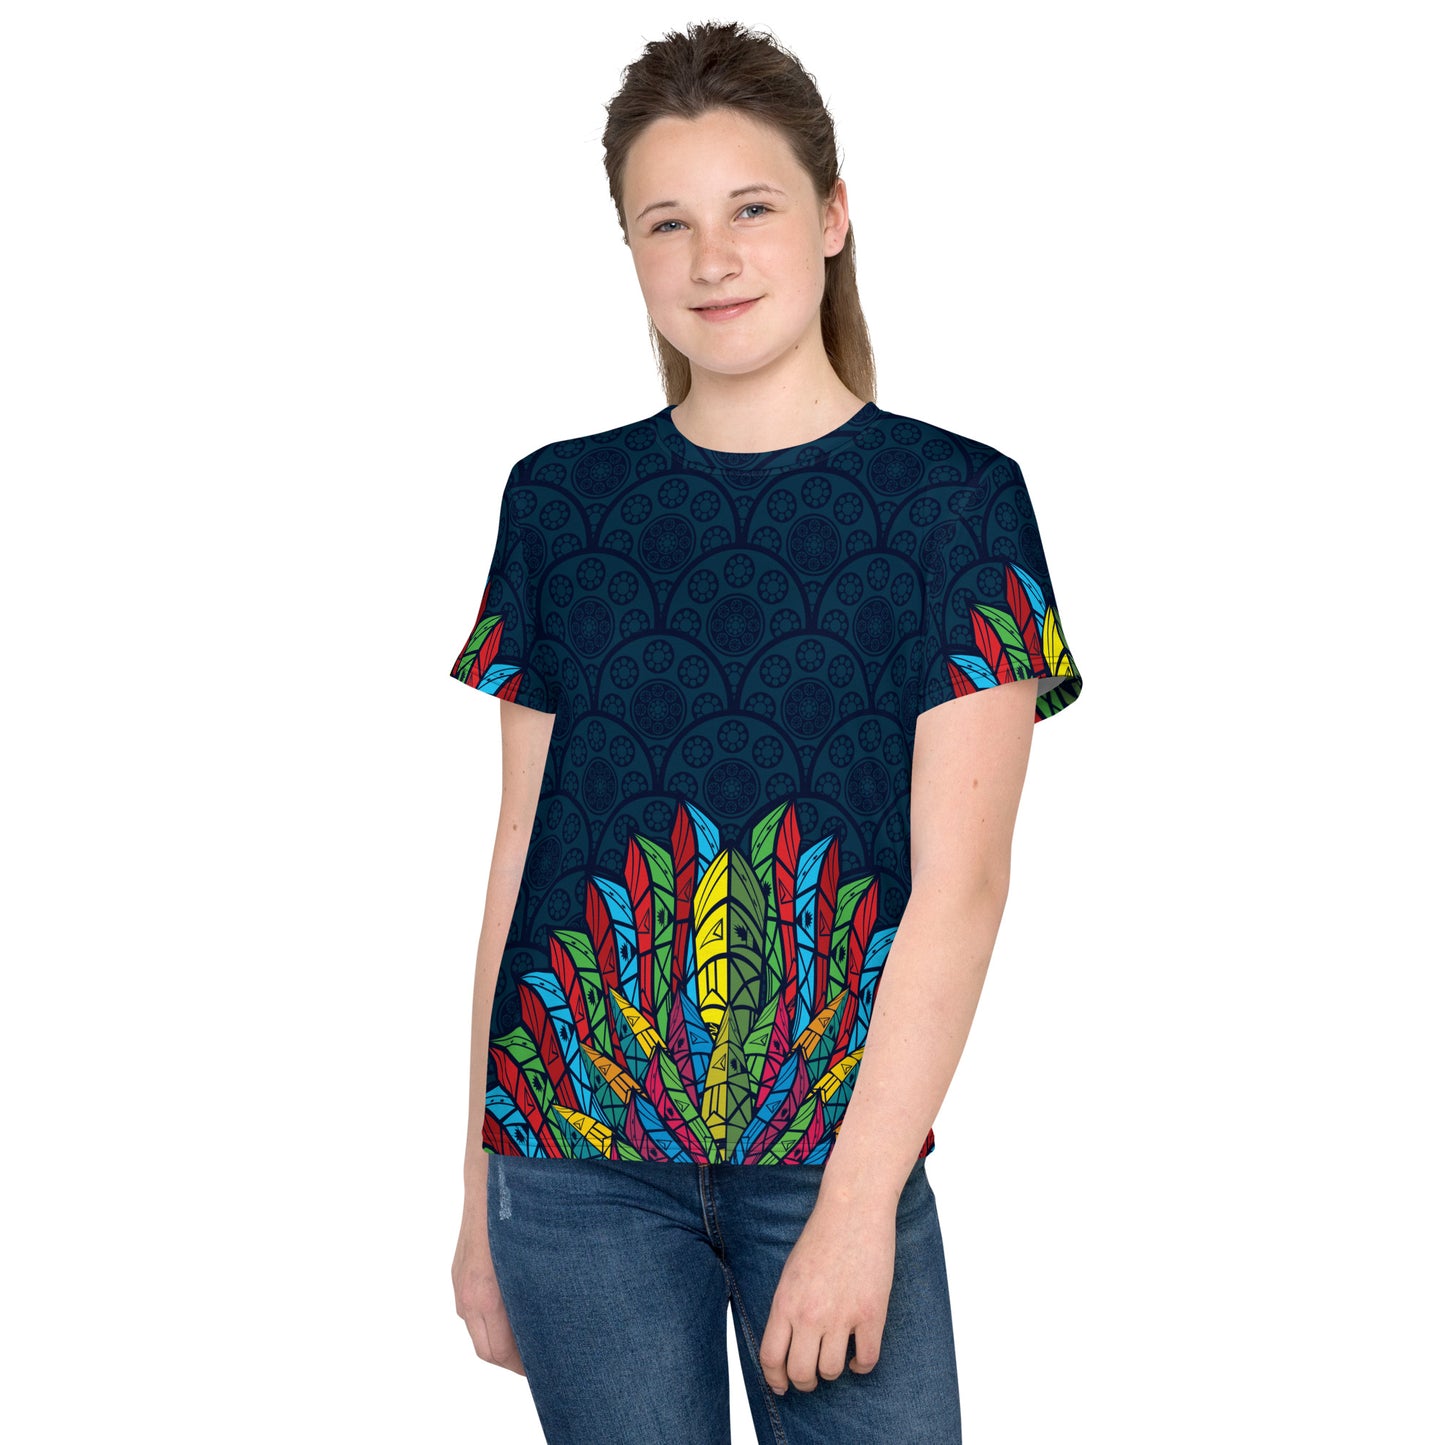 Worldtown Feather Flags Youth crew neck t-shirt